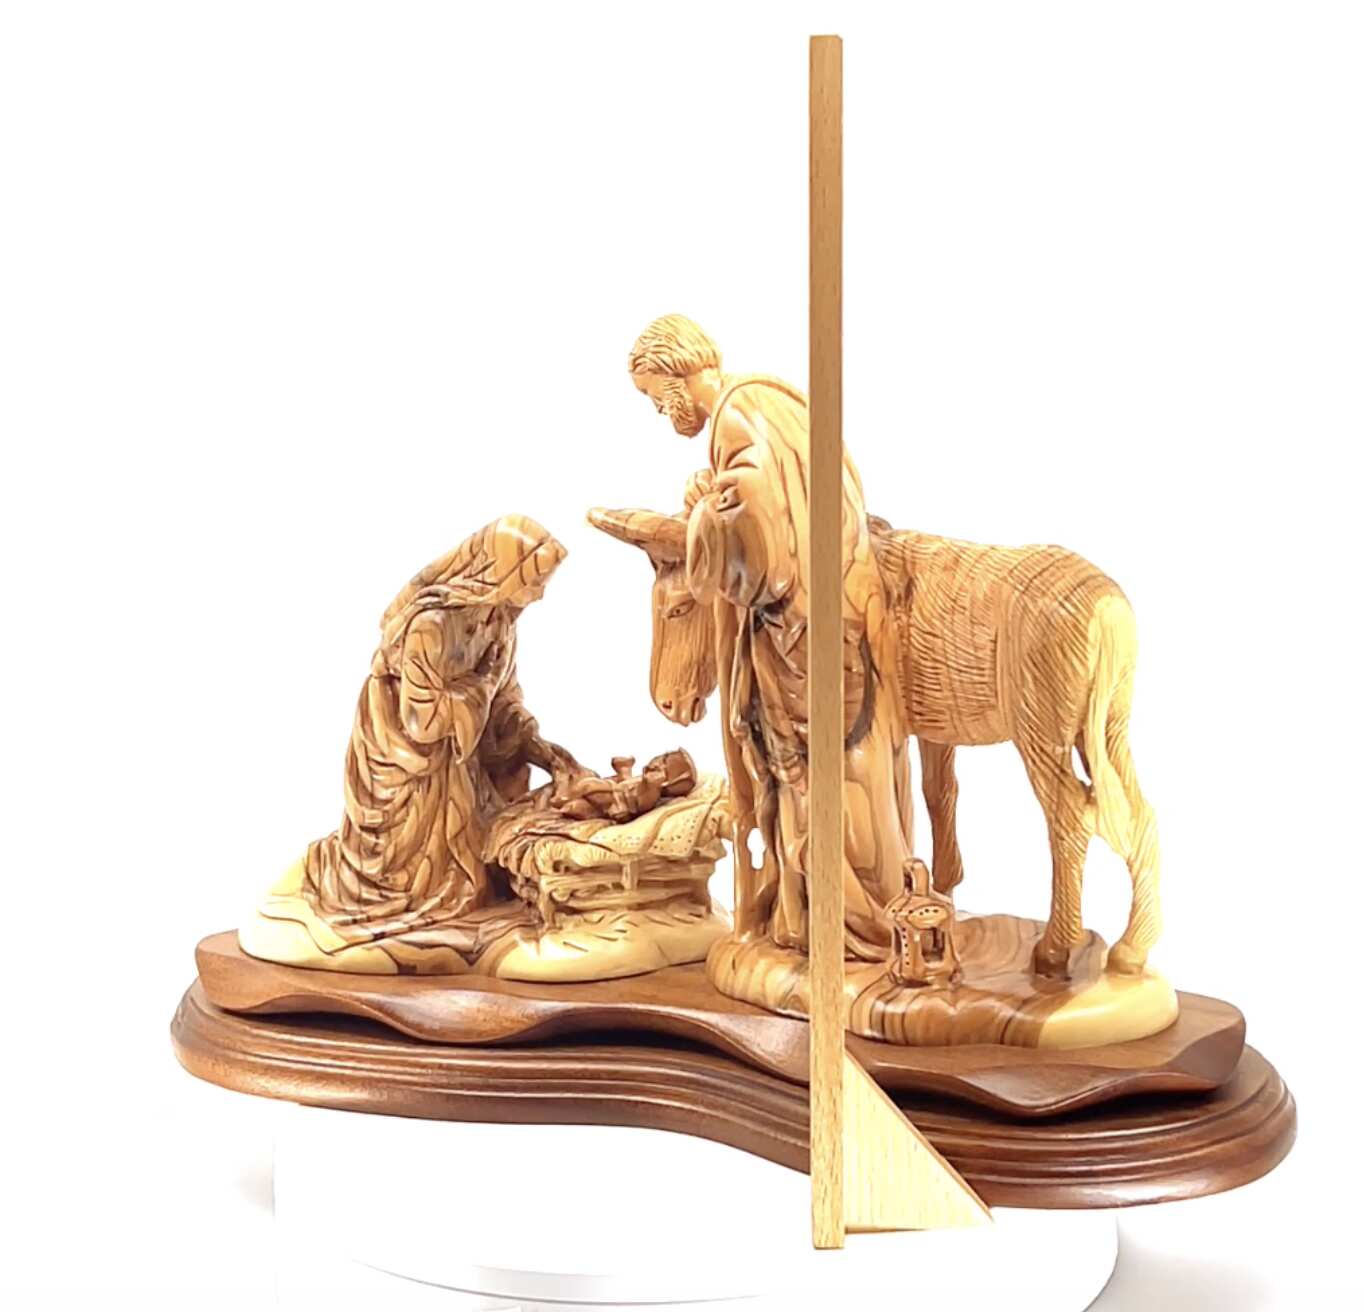 Nativity Scene Sculpture, 15" Virgin Mary, St. Joesph and Baby Jesus Christ in Manager